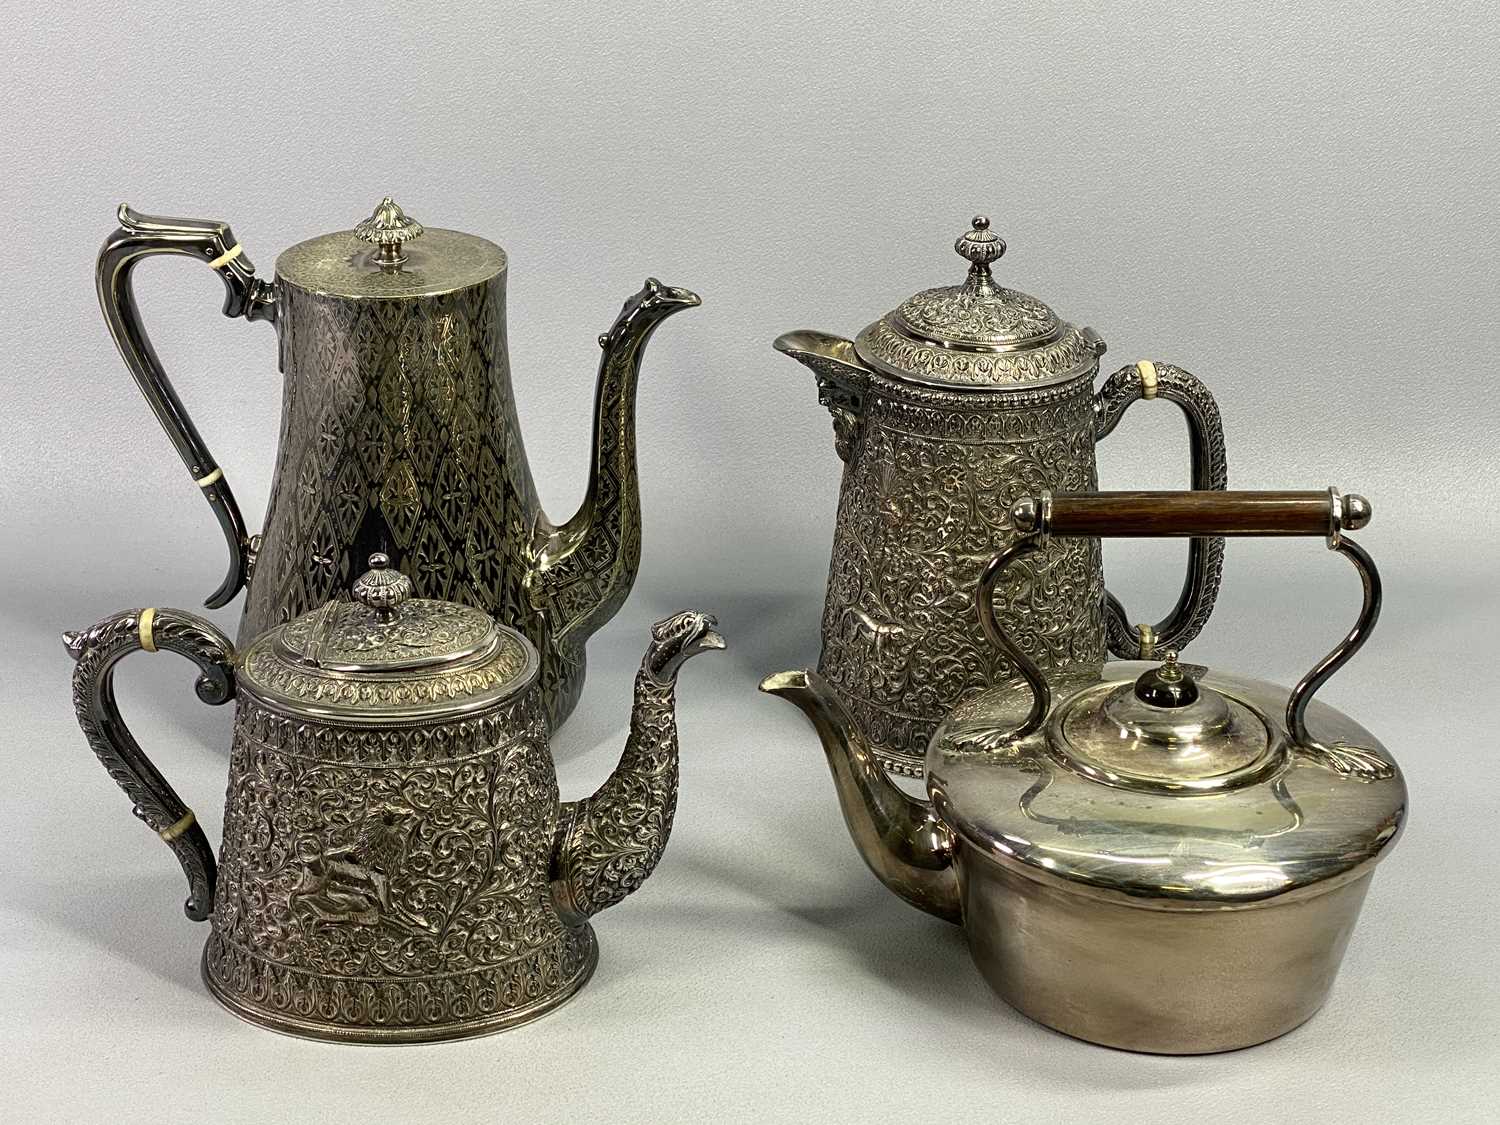 BURMESE STYLE WHITE METAL TEAPOT - repousse chased design with animals hunting, scrolls and flowers,